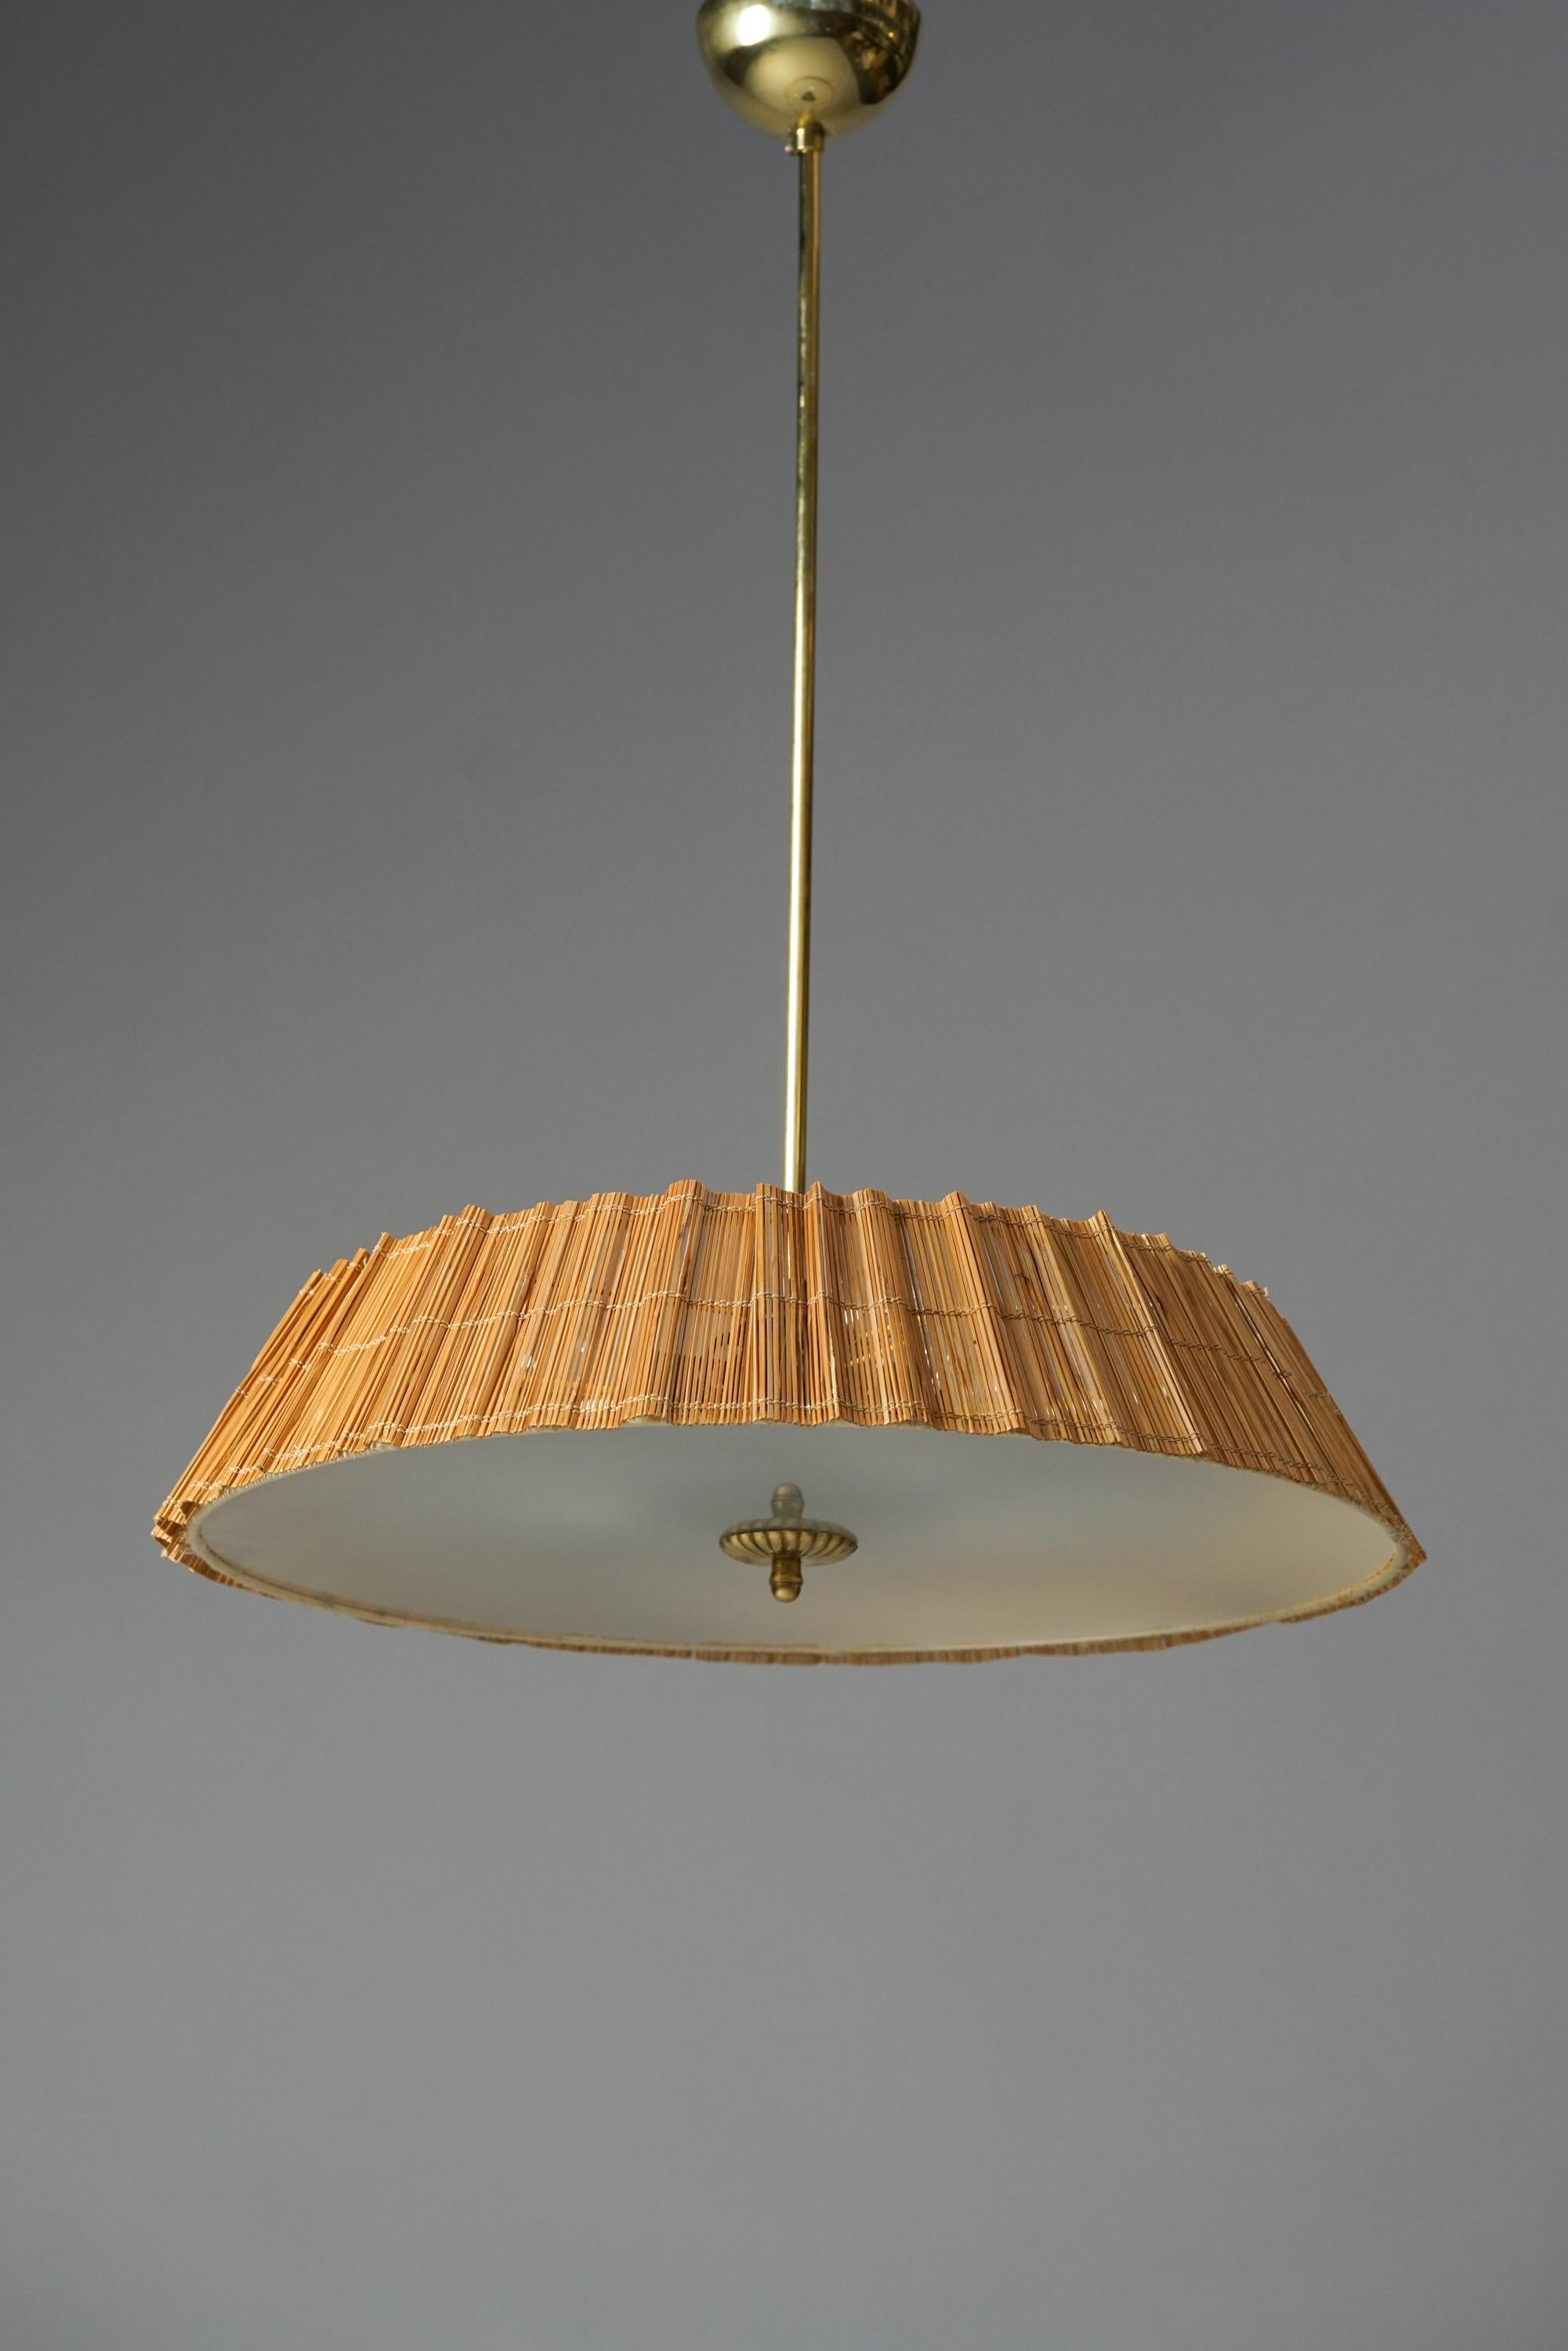 Gunnel Nyman Scandinavian Modern pendant for Taito Oy from the 1940s. Brass, glass and wooden slat shade. Good vintage condition. Minor wear consistent with age and use. A classic Gunnel Nyman pendant.